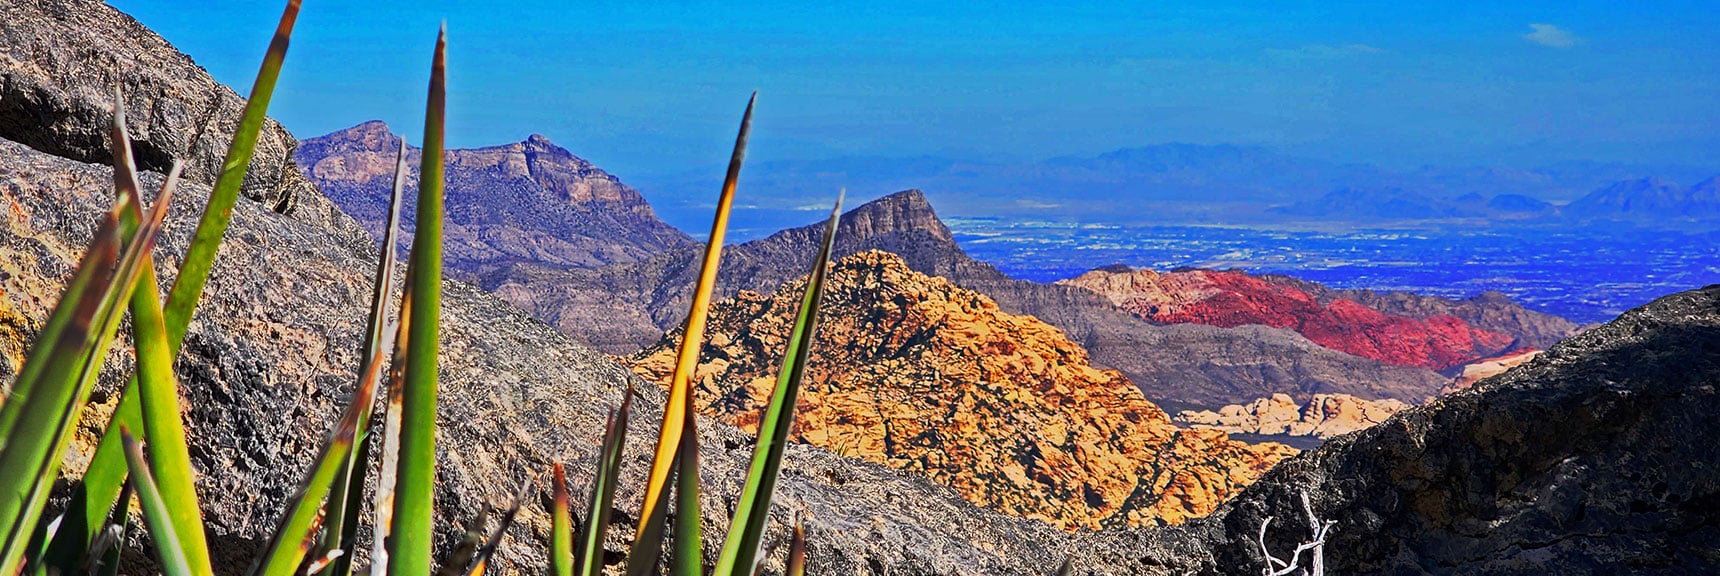 Another View into Red Rock Canyon and Las Vegas Valley (beyond). | Switchback Spring Pinnacle | Wilson Ridge | Lovell Canyon, Nevada